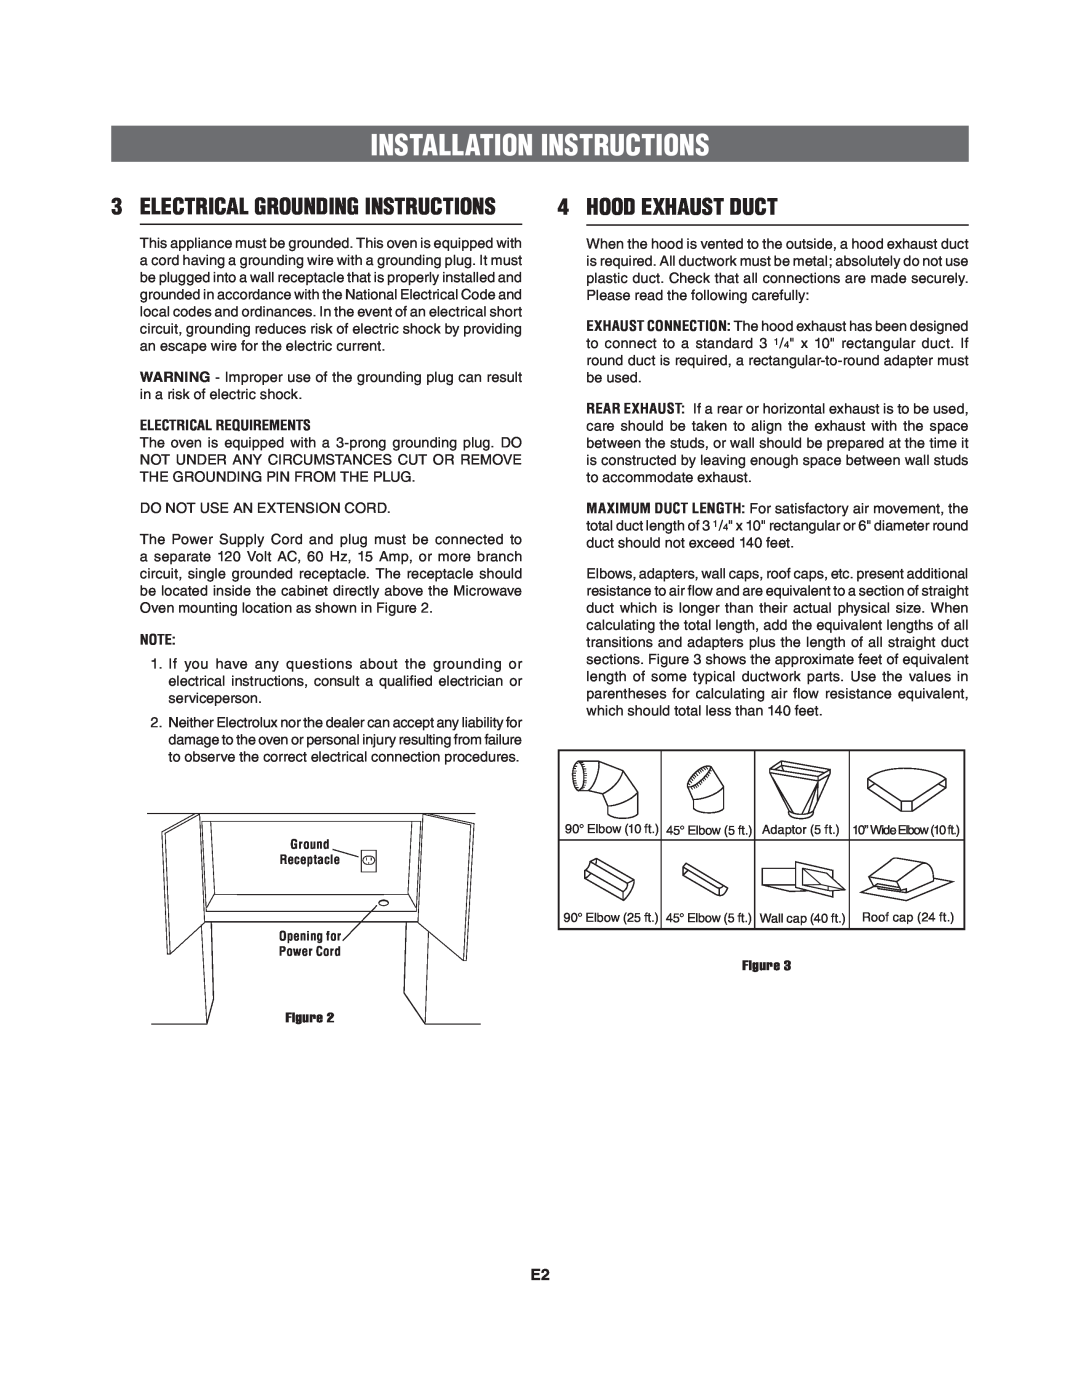 Frigidaire 316495062 installation instructions Installation Instructions, Hood Exhaust Duct, Electrical Requirements 